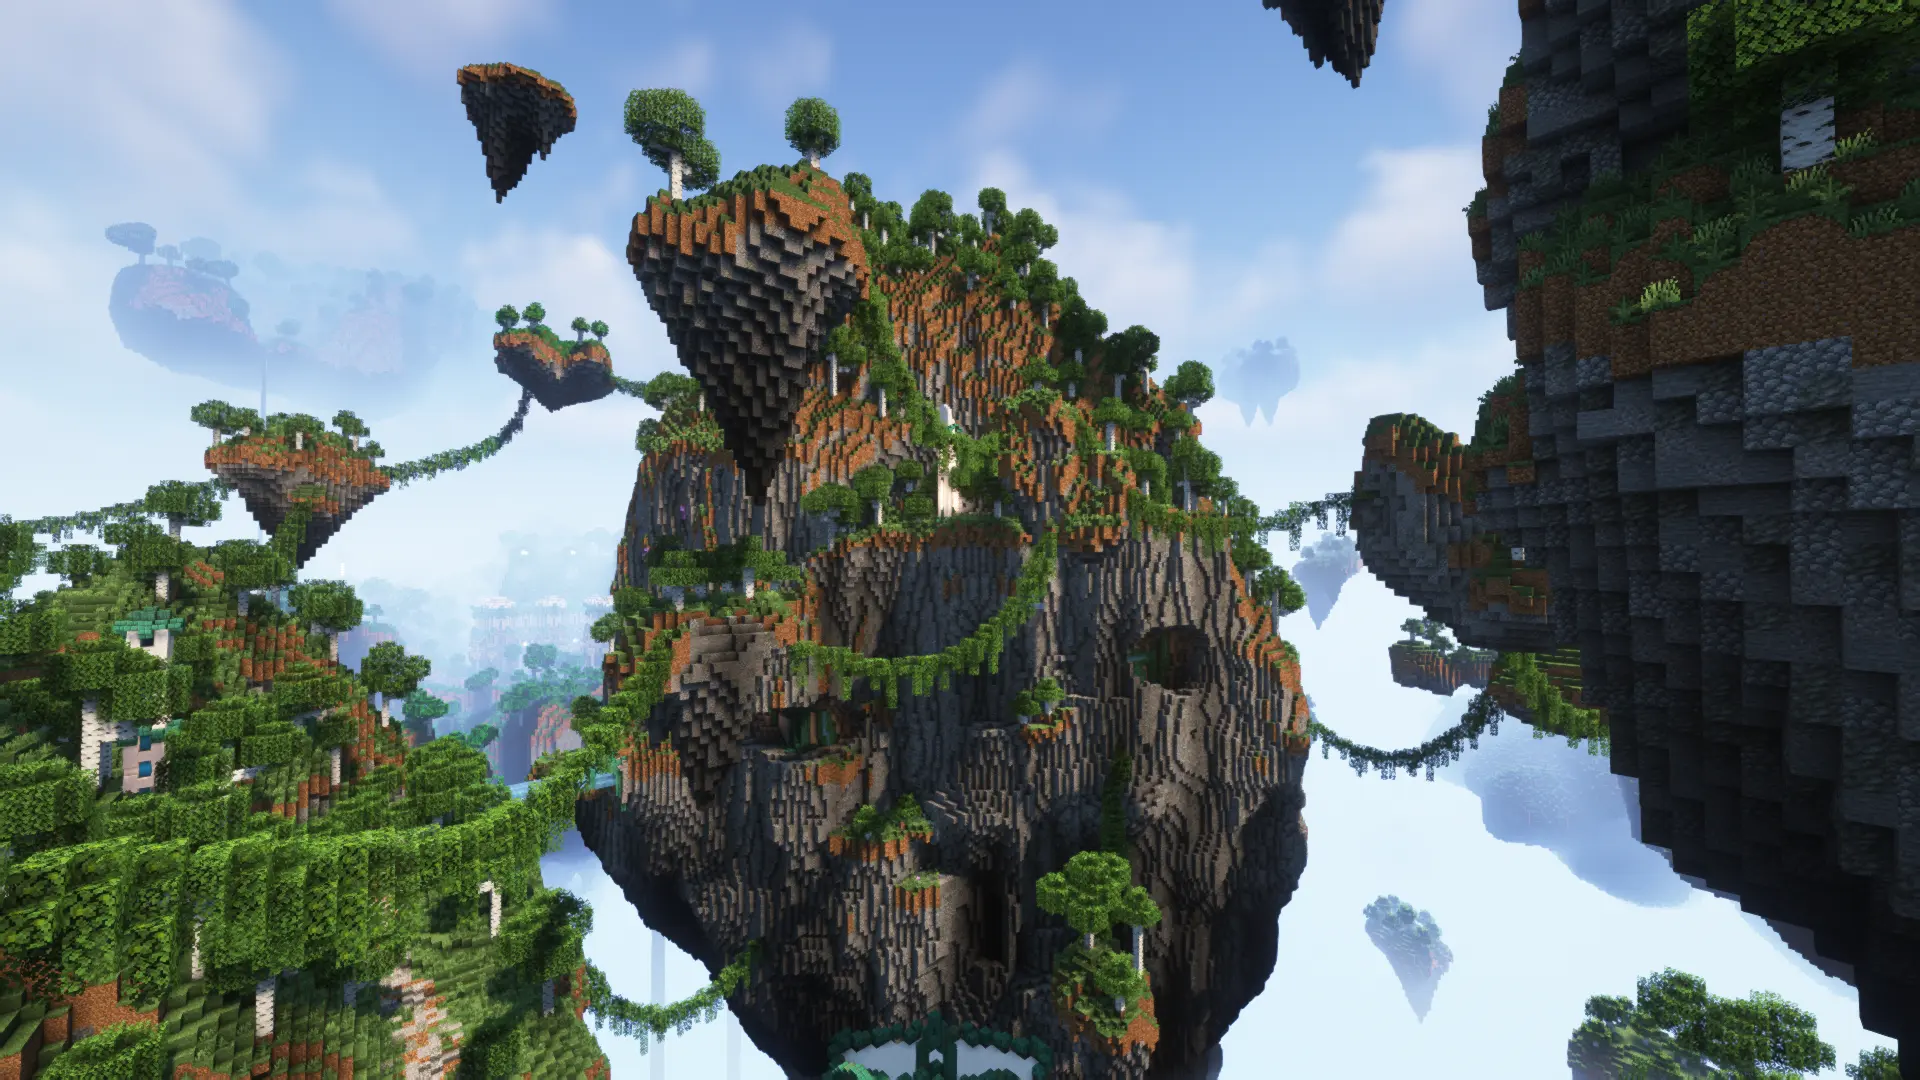 A series of floating islands connected by vines